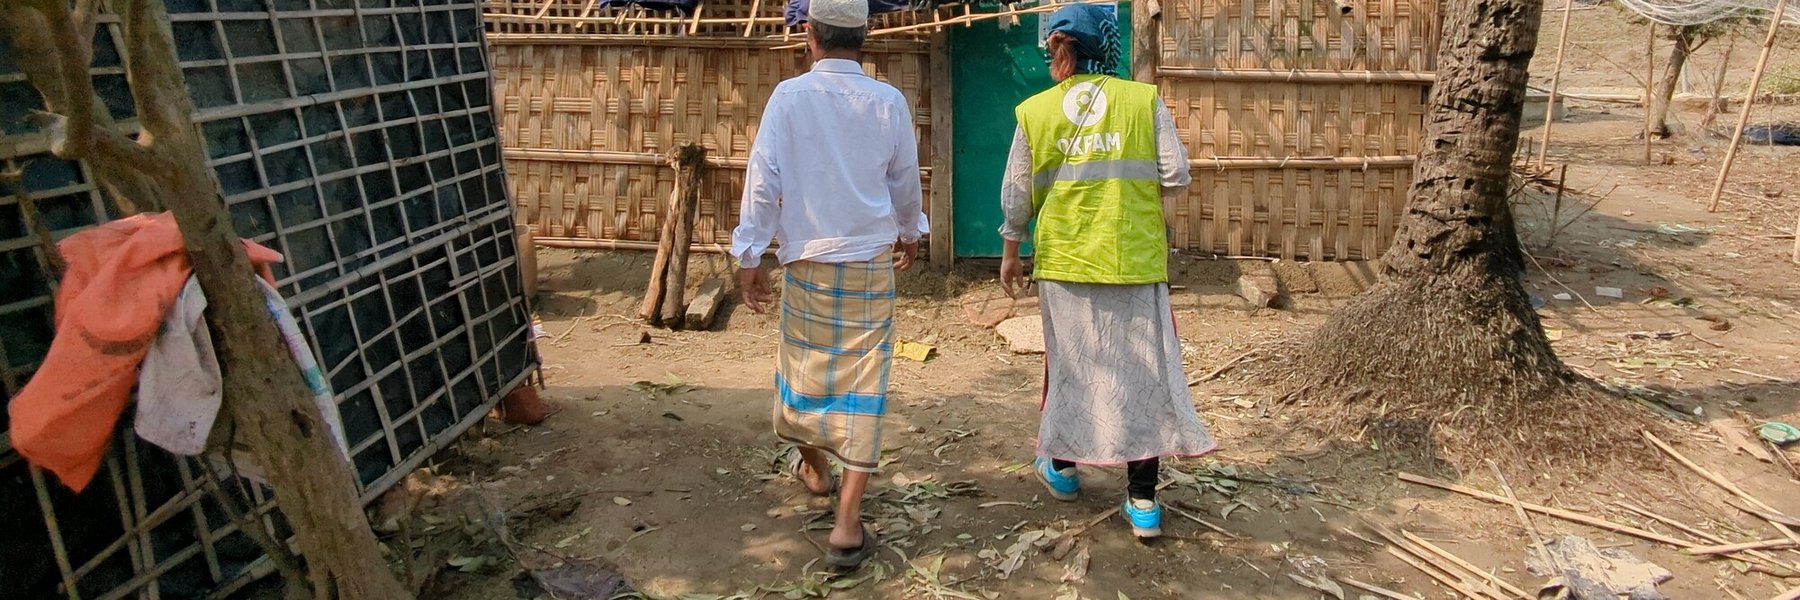 An Oxfam worker stands next to a man in a camp with a hut in front of them with cushions and bags on the roof.